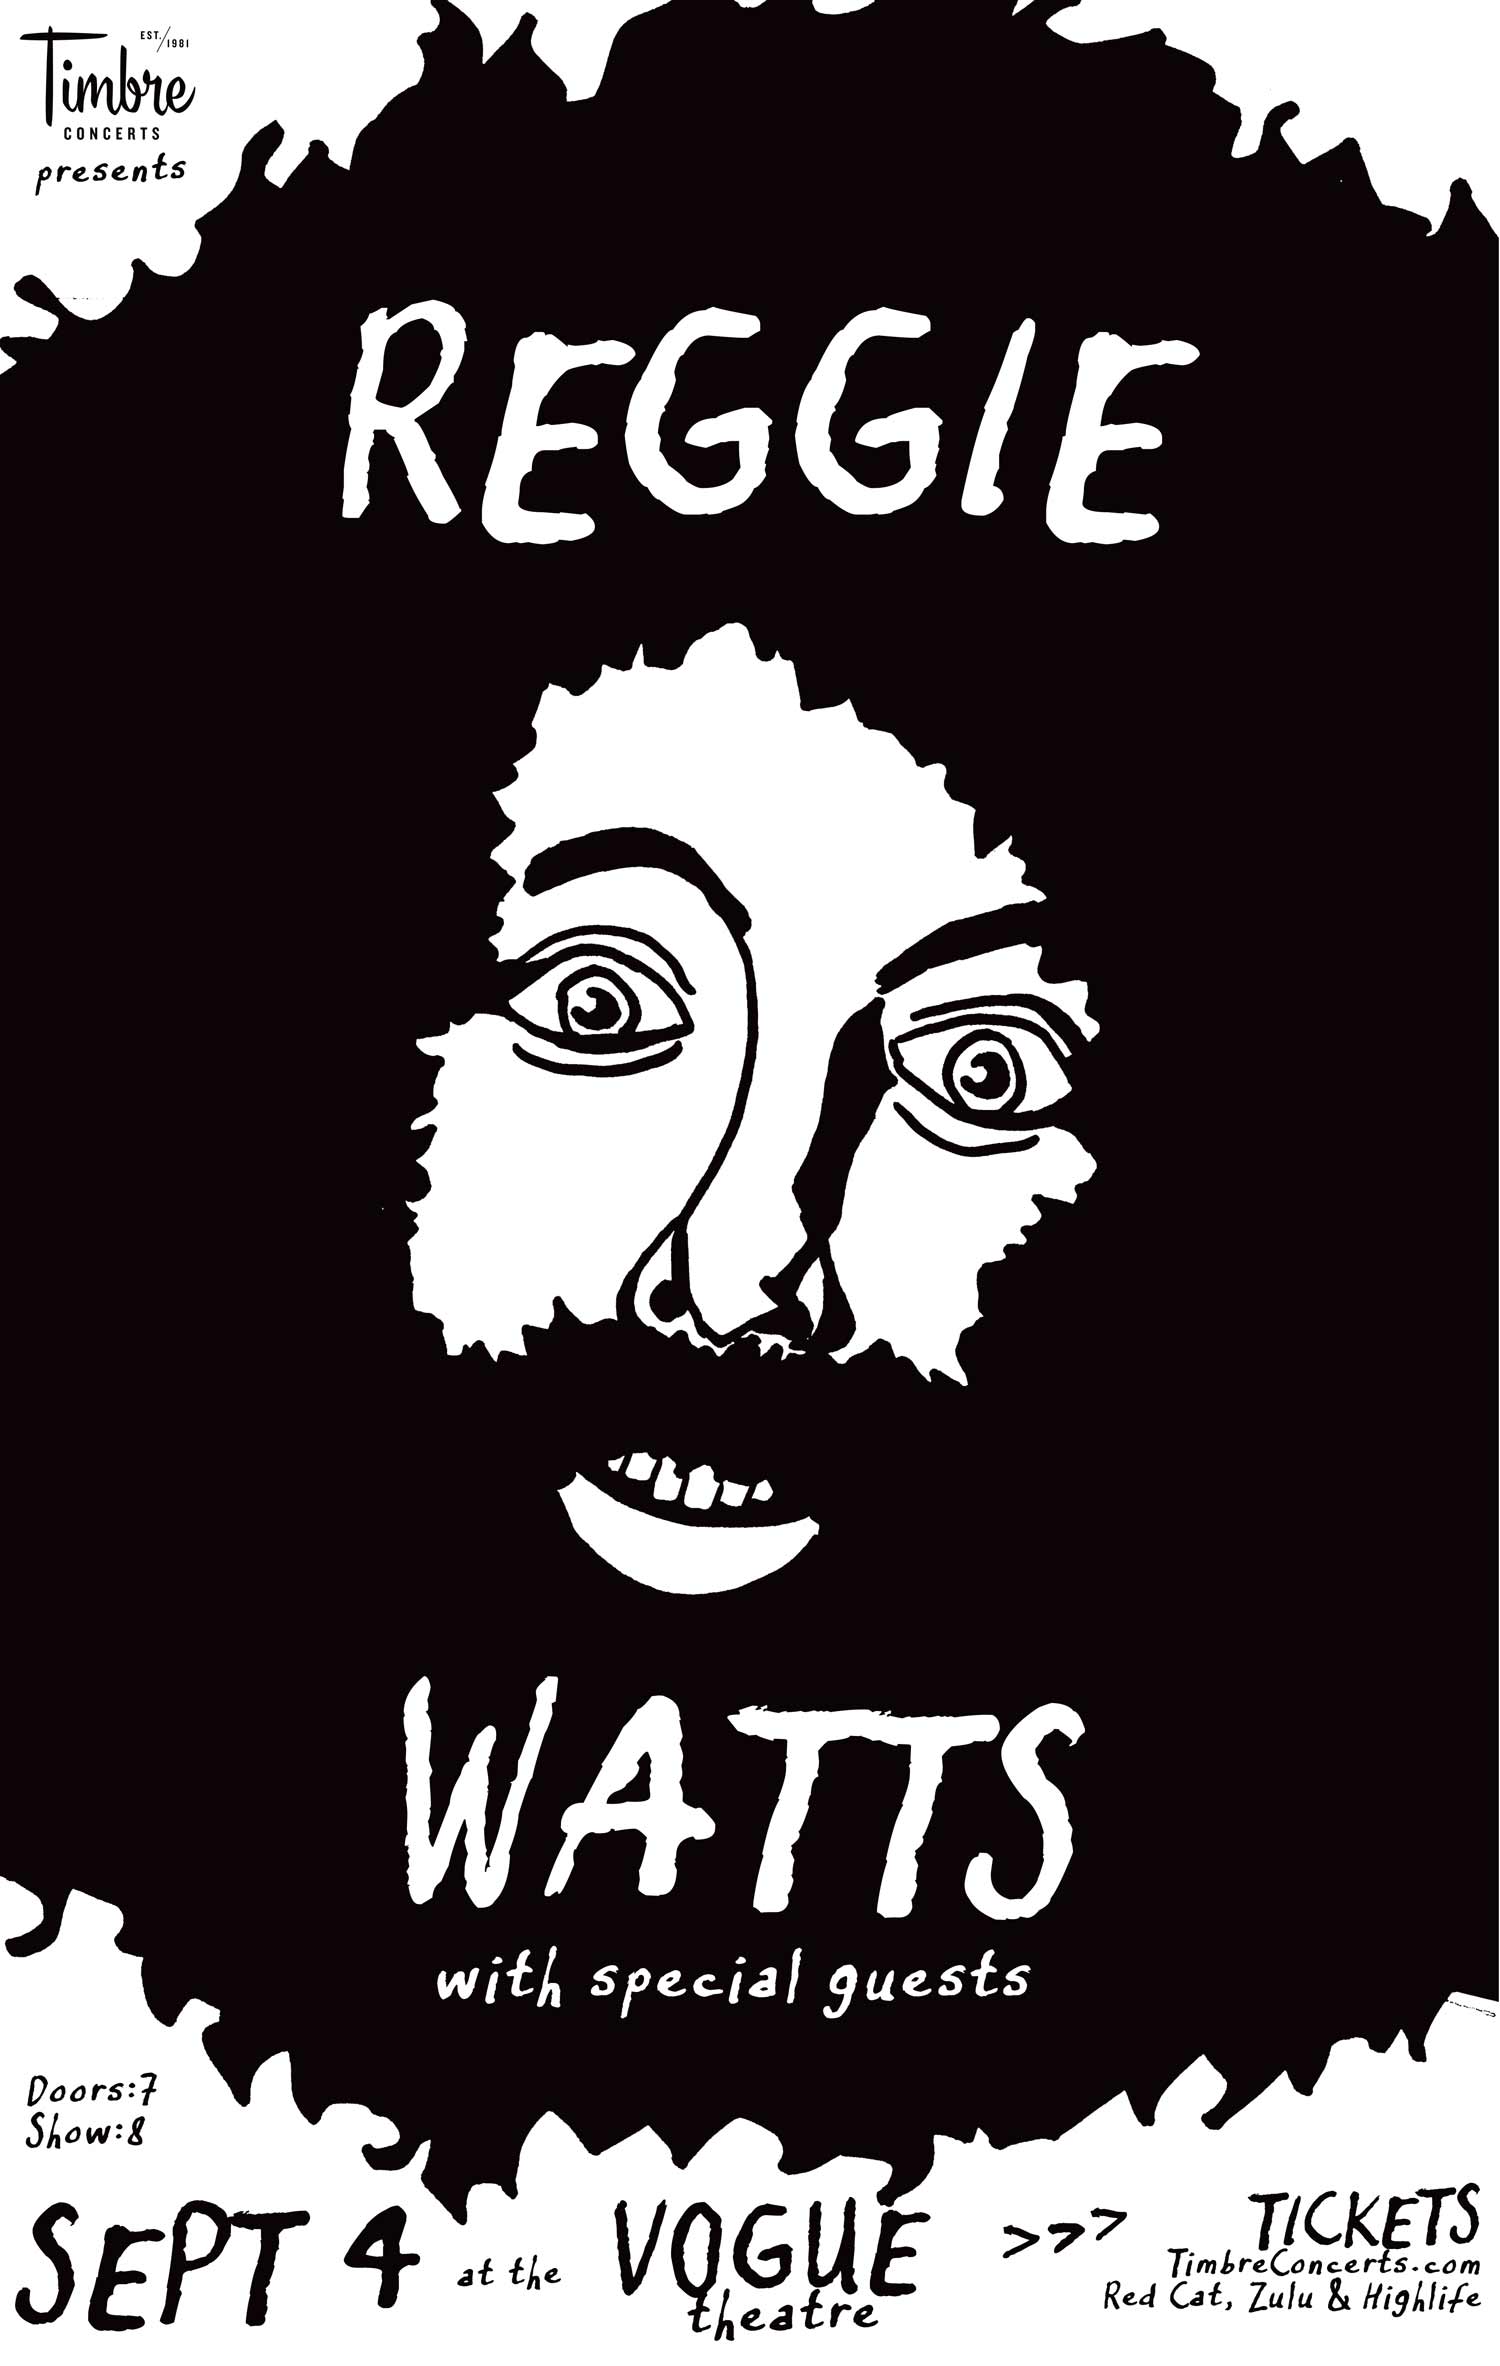 Illustrated show poster for Reggie Watts